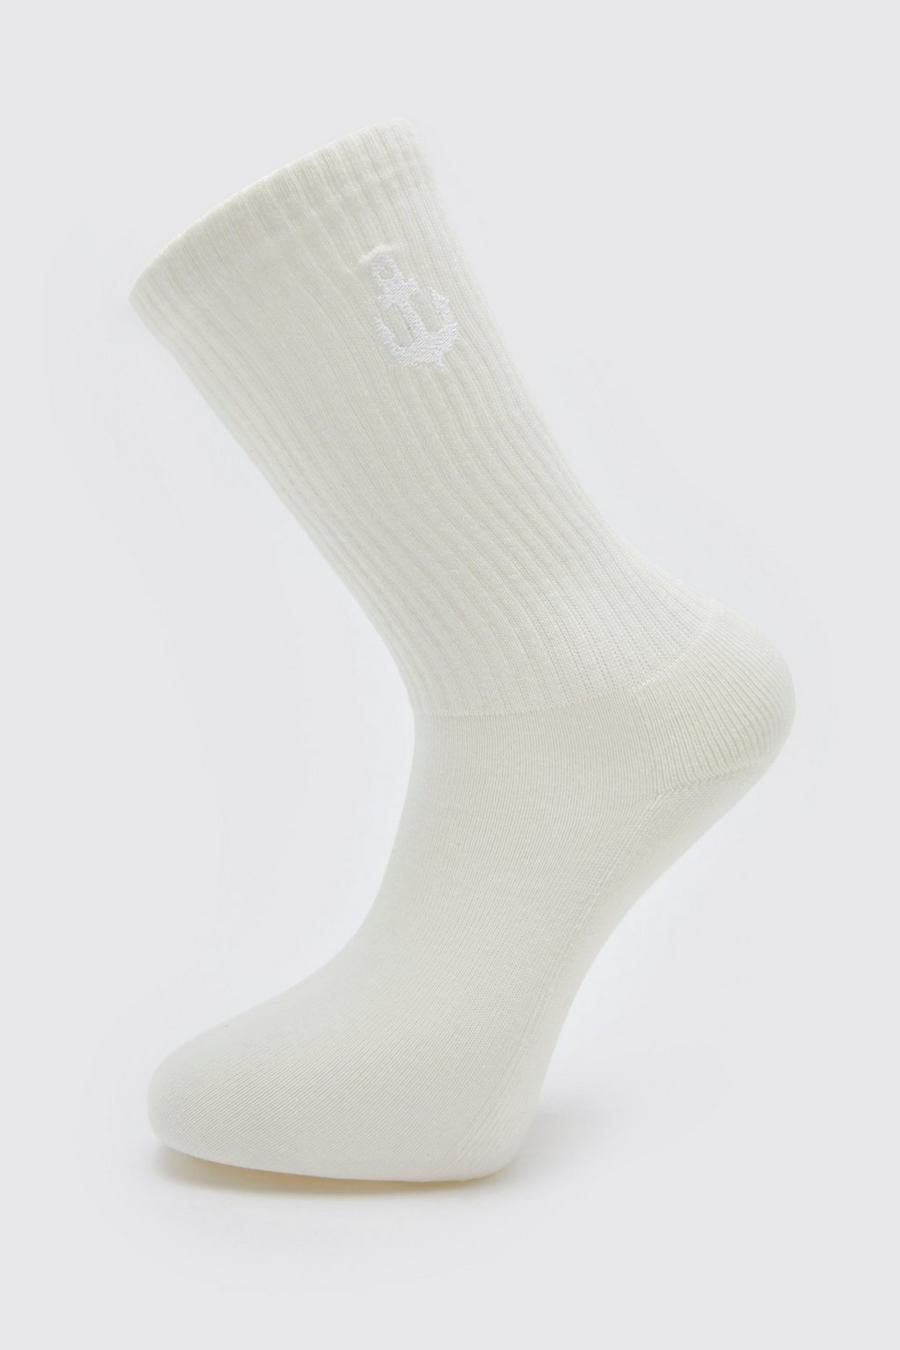 Ecru white 1 Pack Embroidered Anchor Sock